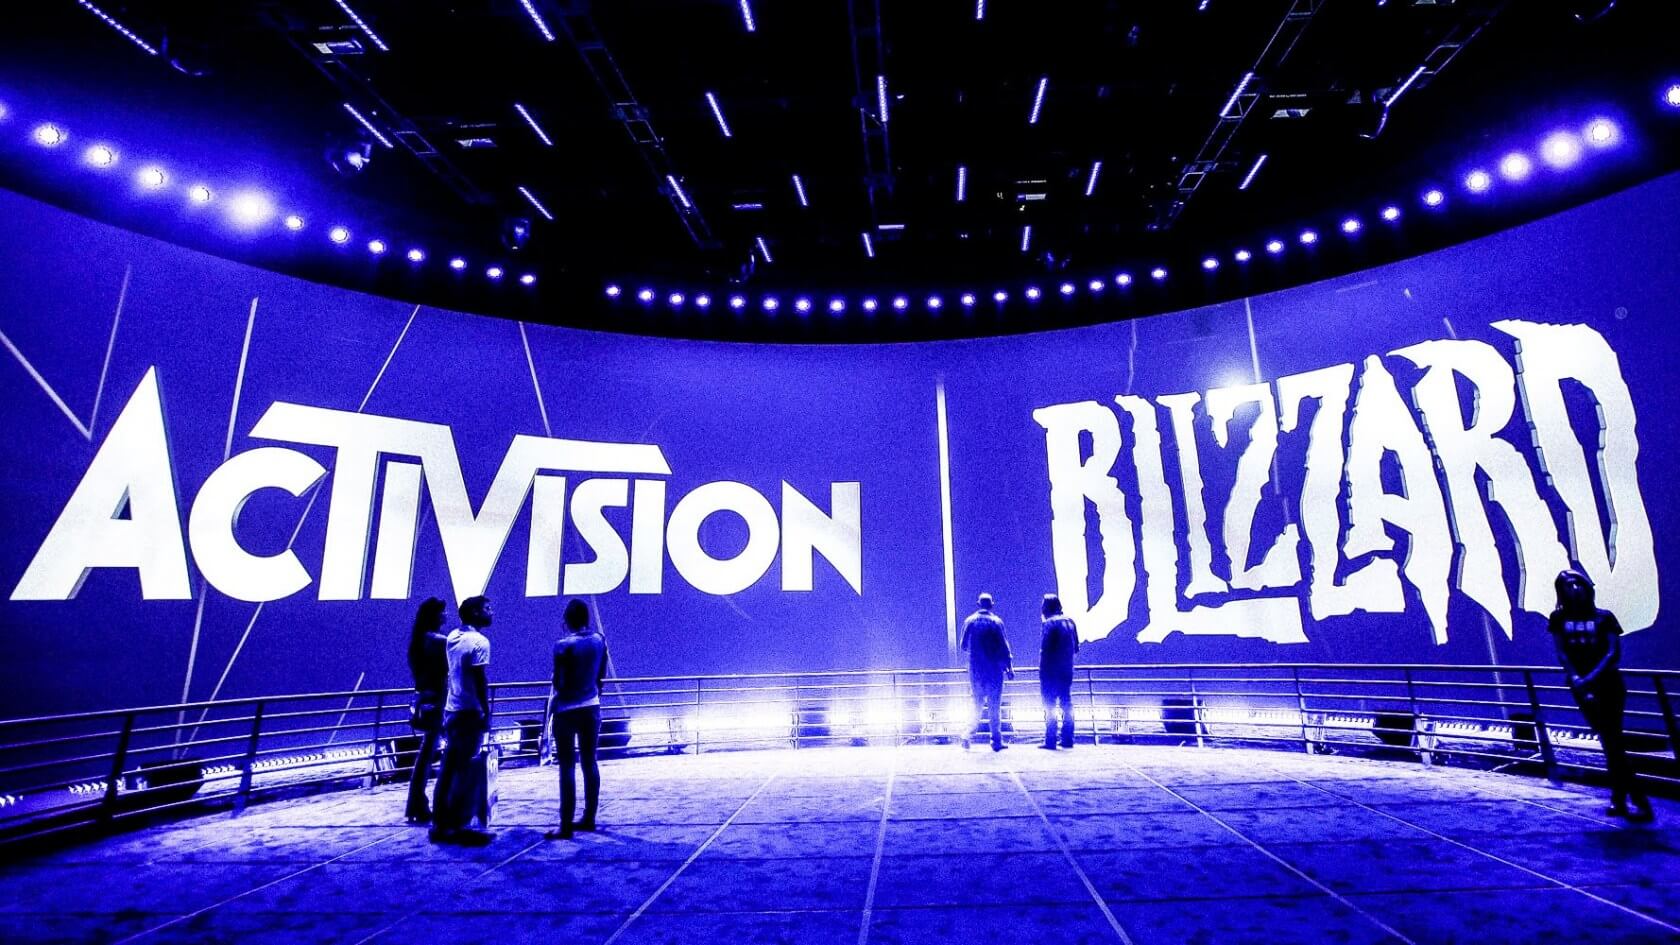 Activision-Blizzard reportedly planning hundreds of layoffs